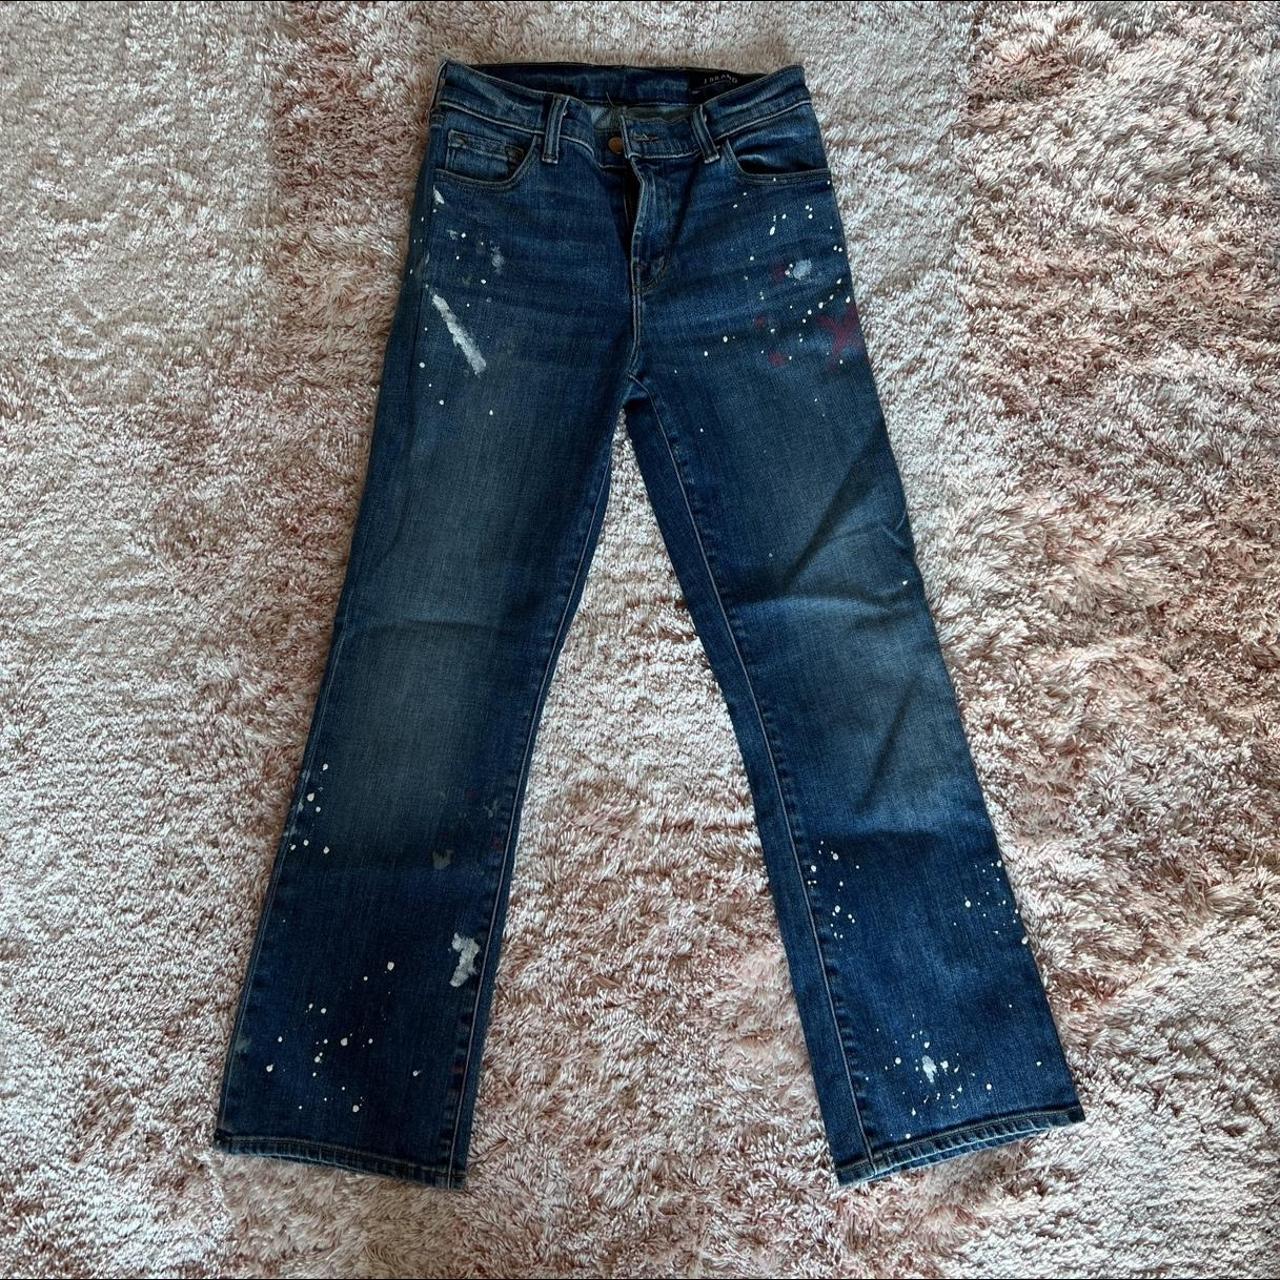 J BRAND PAINTED JEANS. , Low to mid rise, size 26.